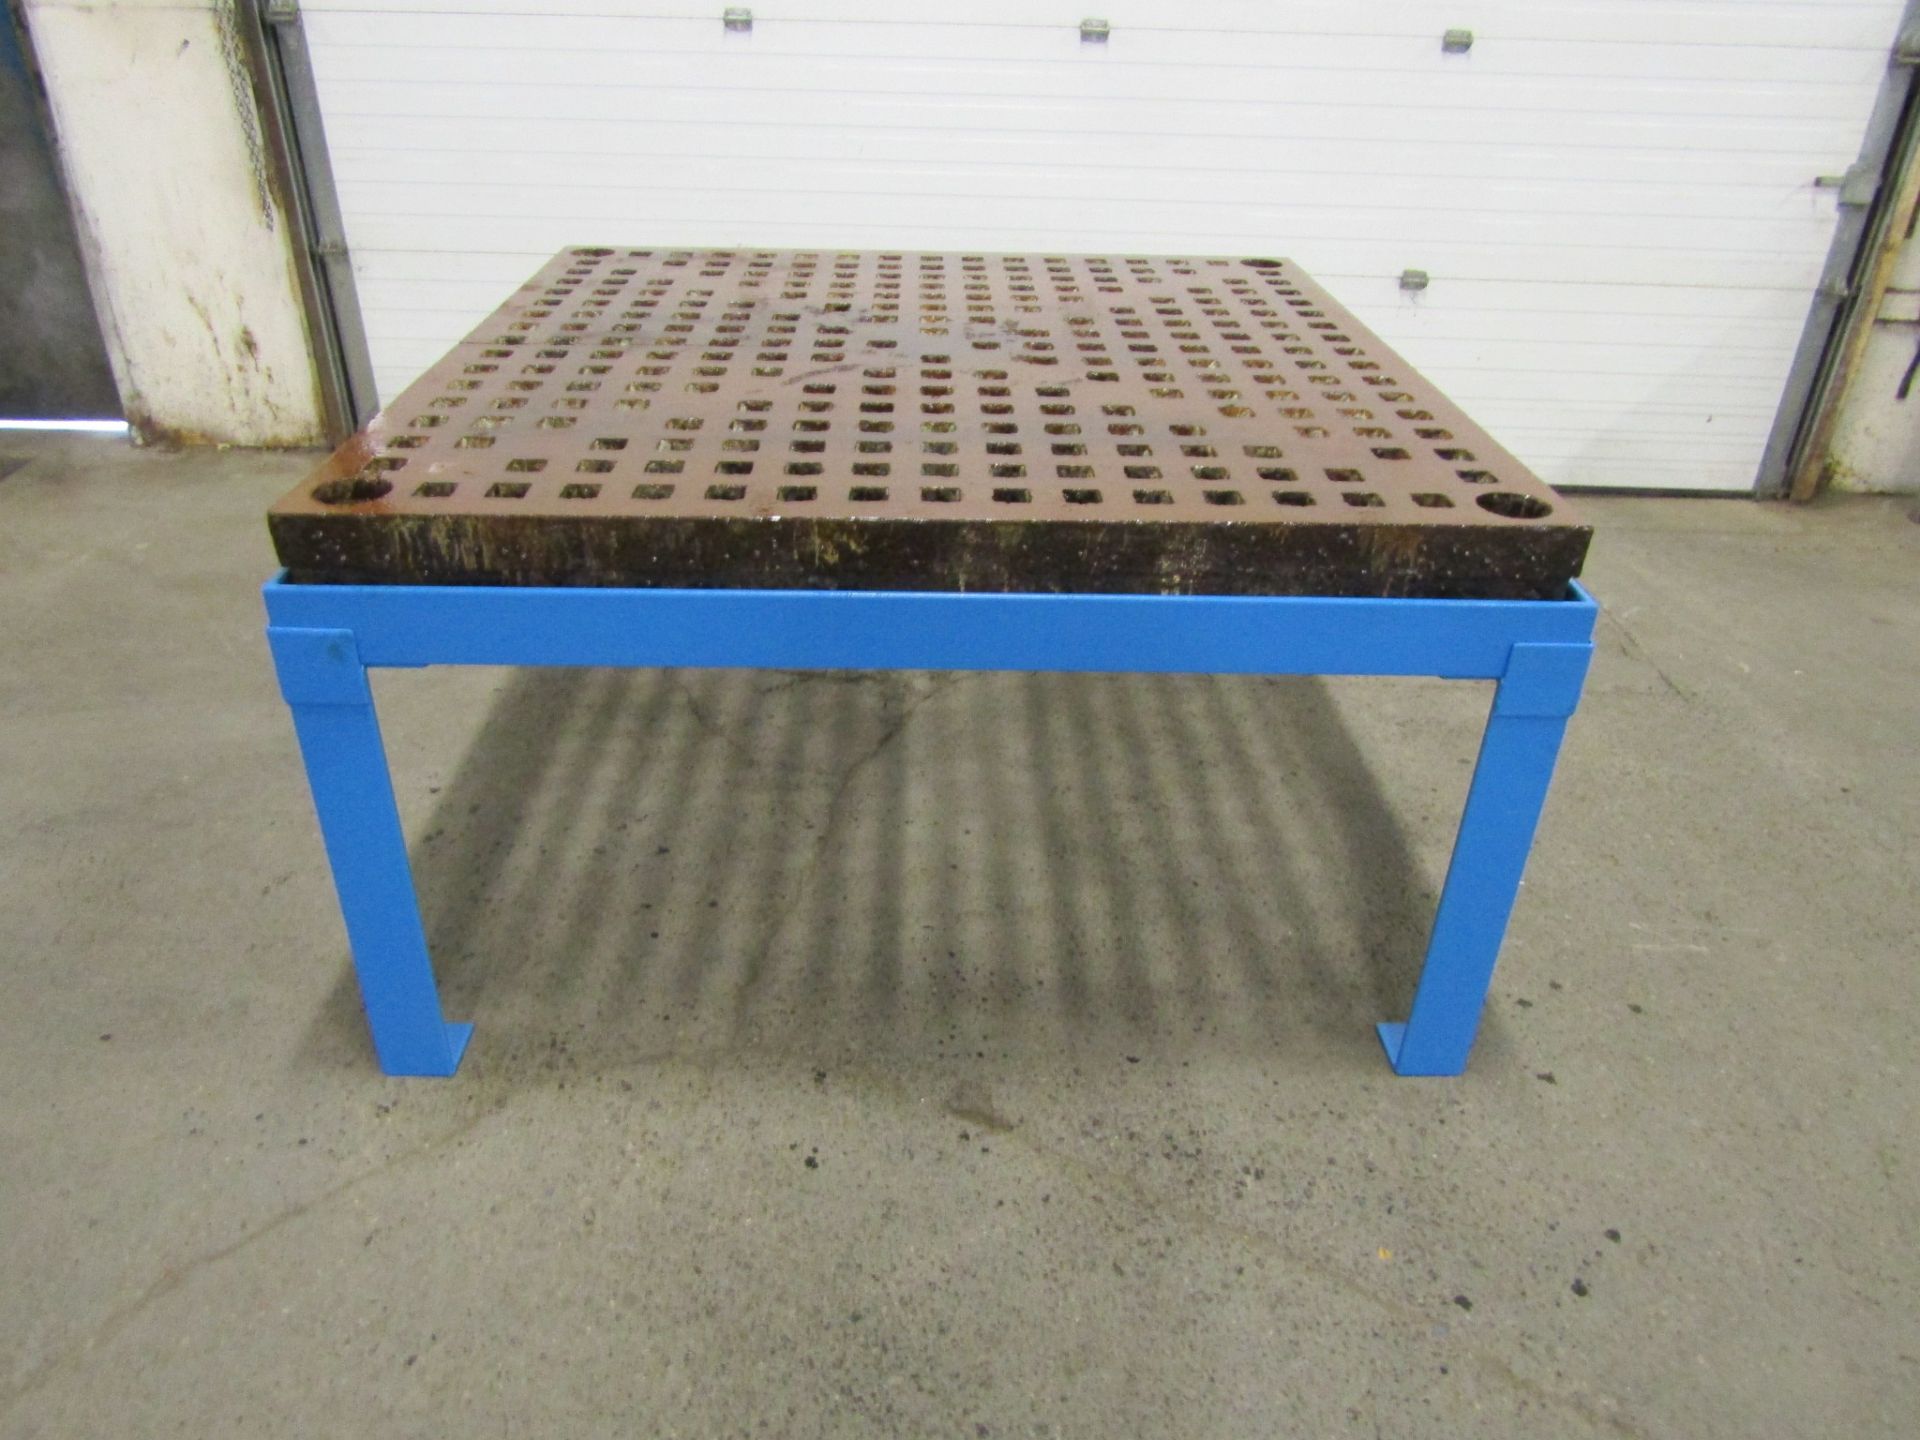 MINT Acorn Welding Table - 5' x 5' / 60" x 60" with table stand